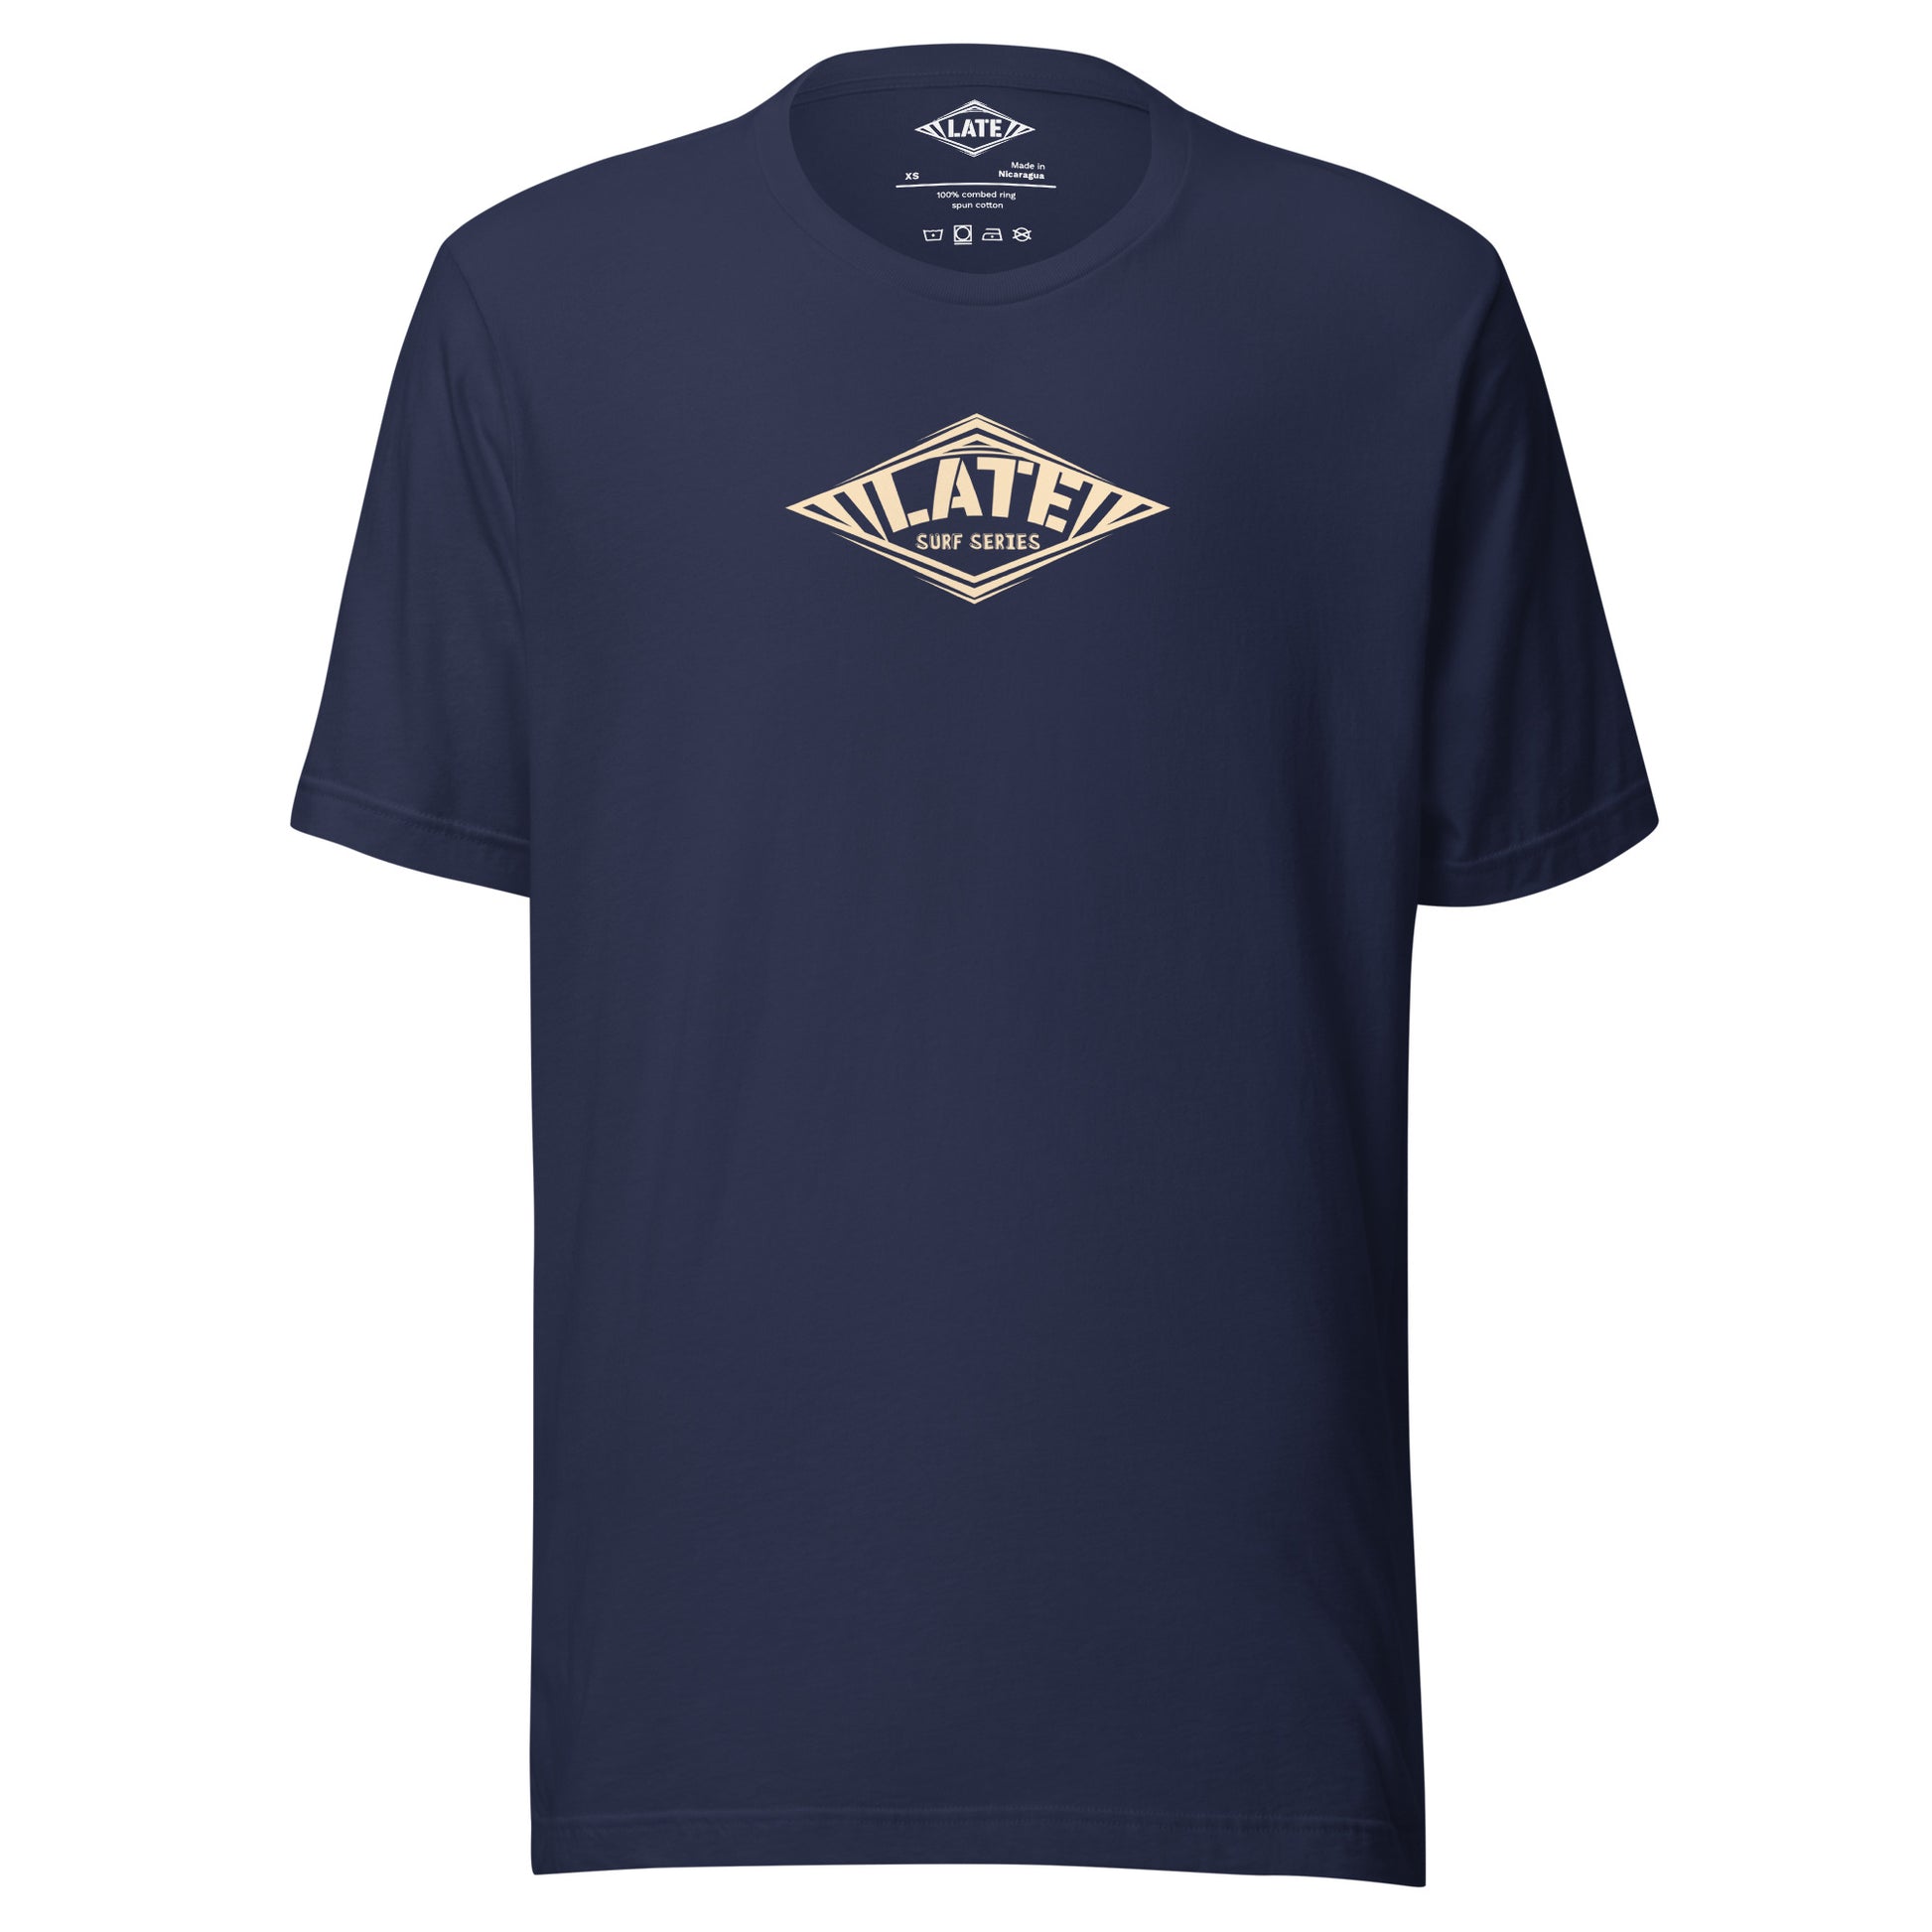 T-Shirt Take On The Elements style hurley texte surf series, et logo Late tshirt de face couleur navy